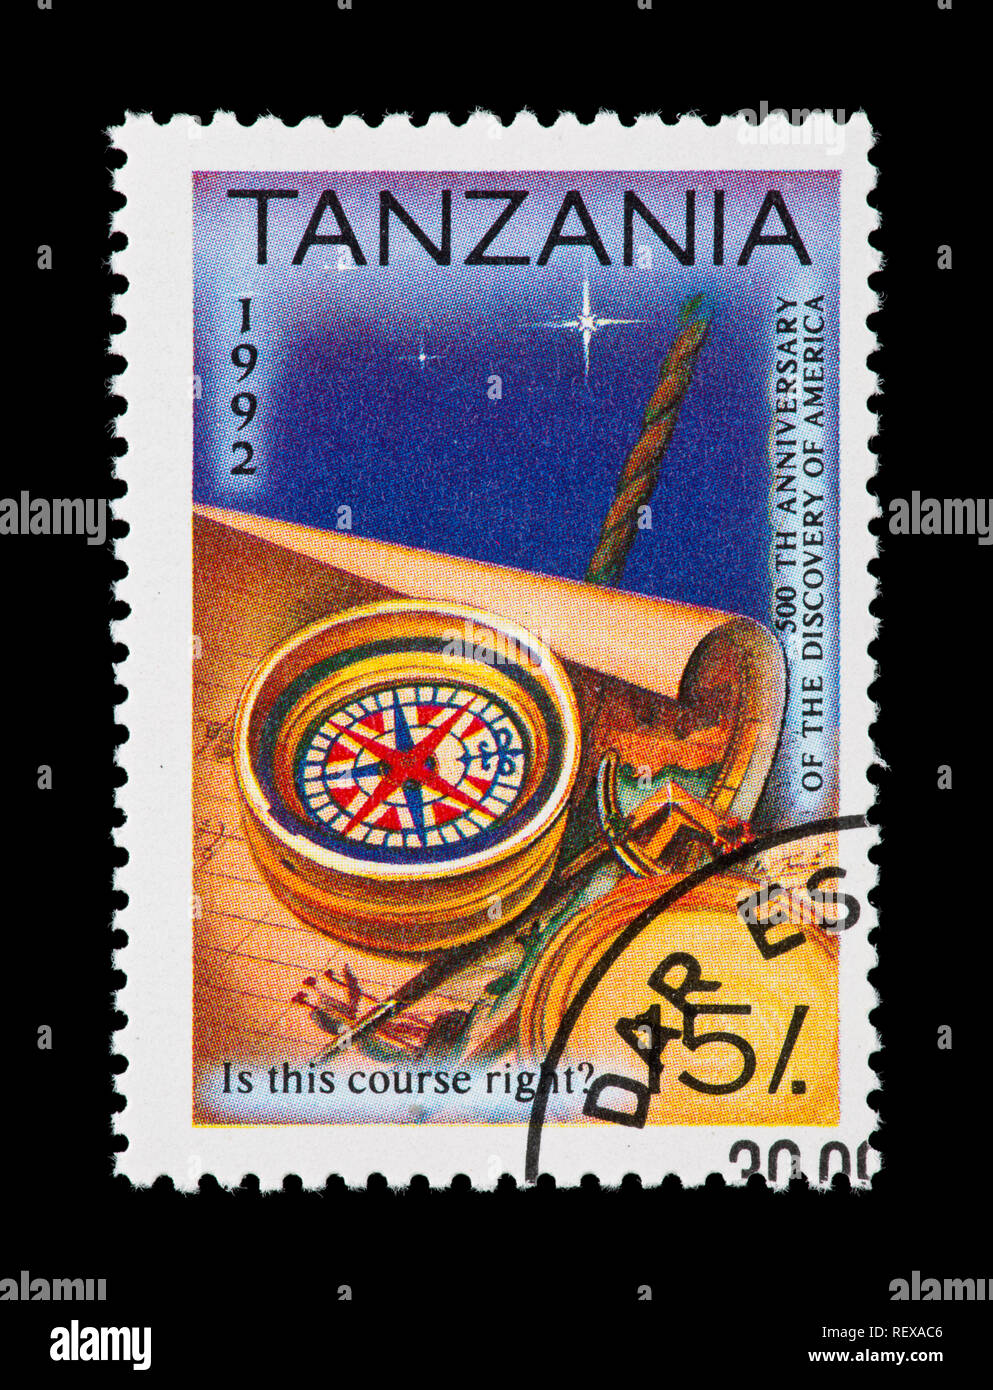 Postage stamp from Tanzania depicting a compass and chart, issued for the 500th anniversary of the discovery of the Americas Stock Photo